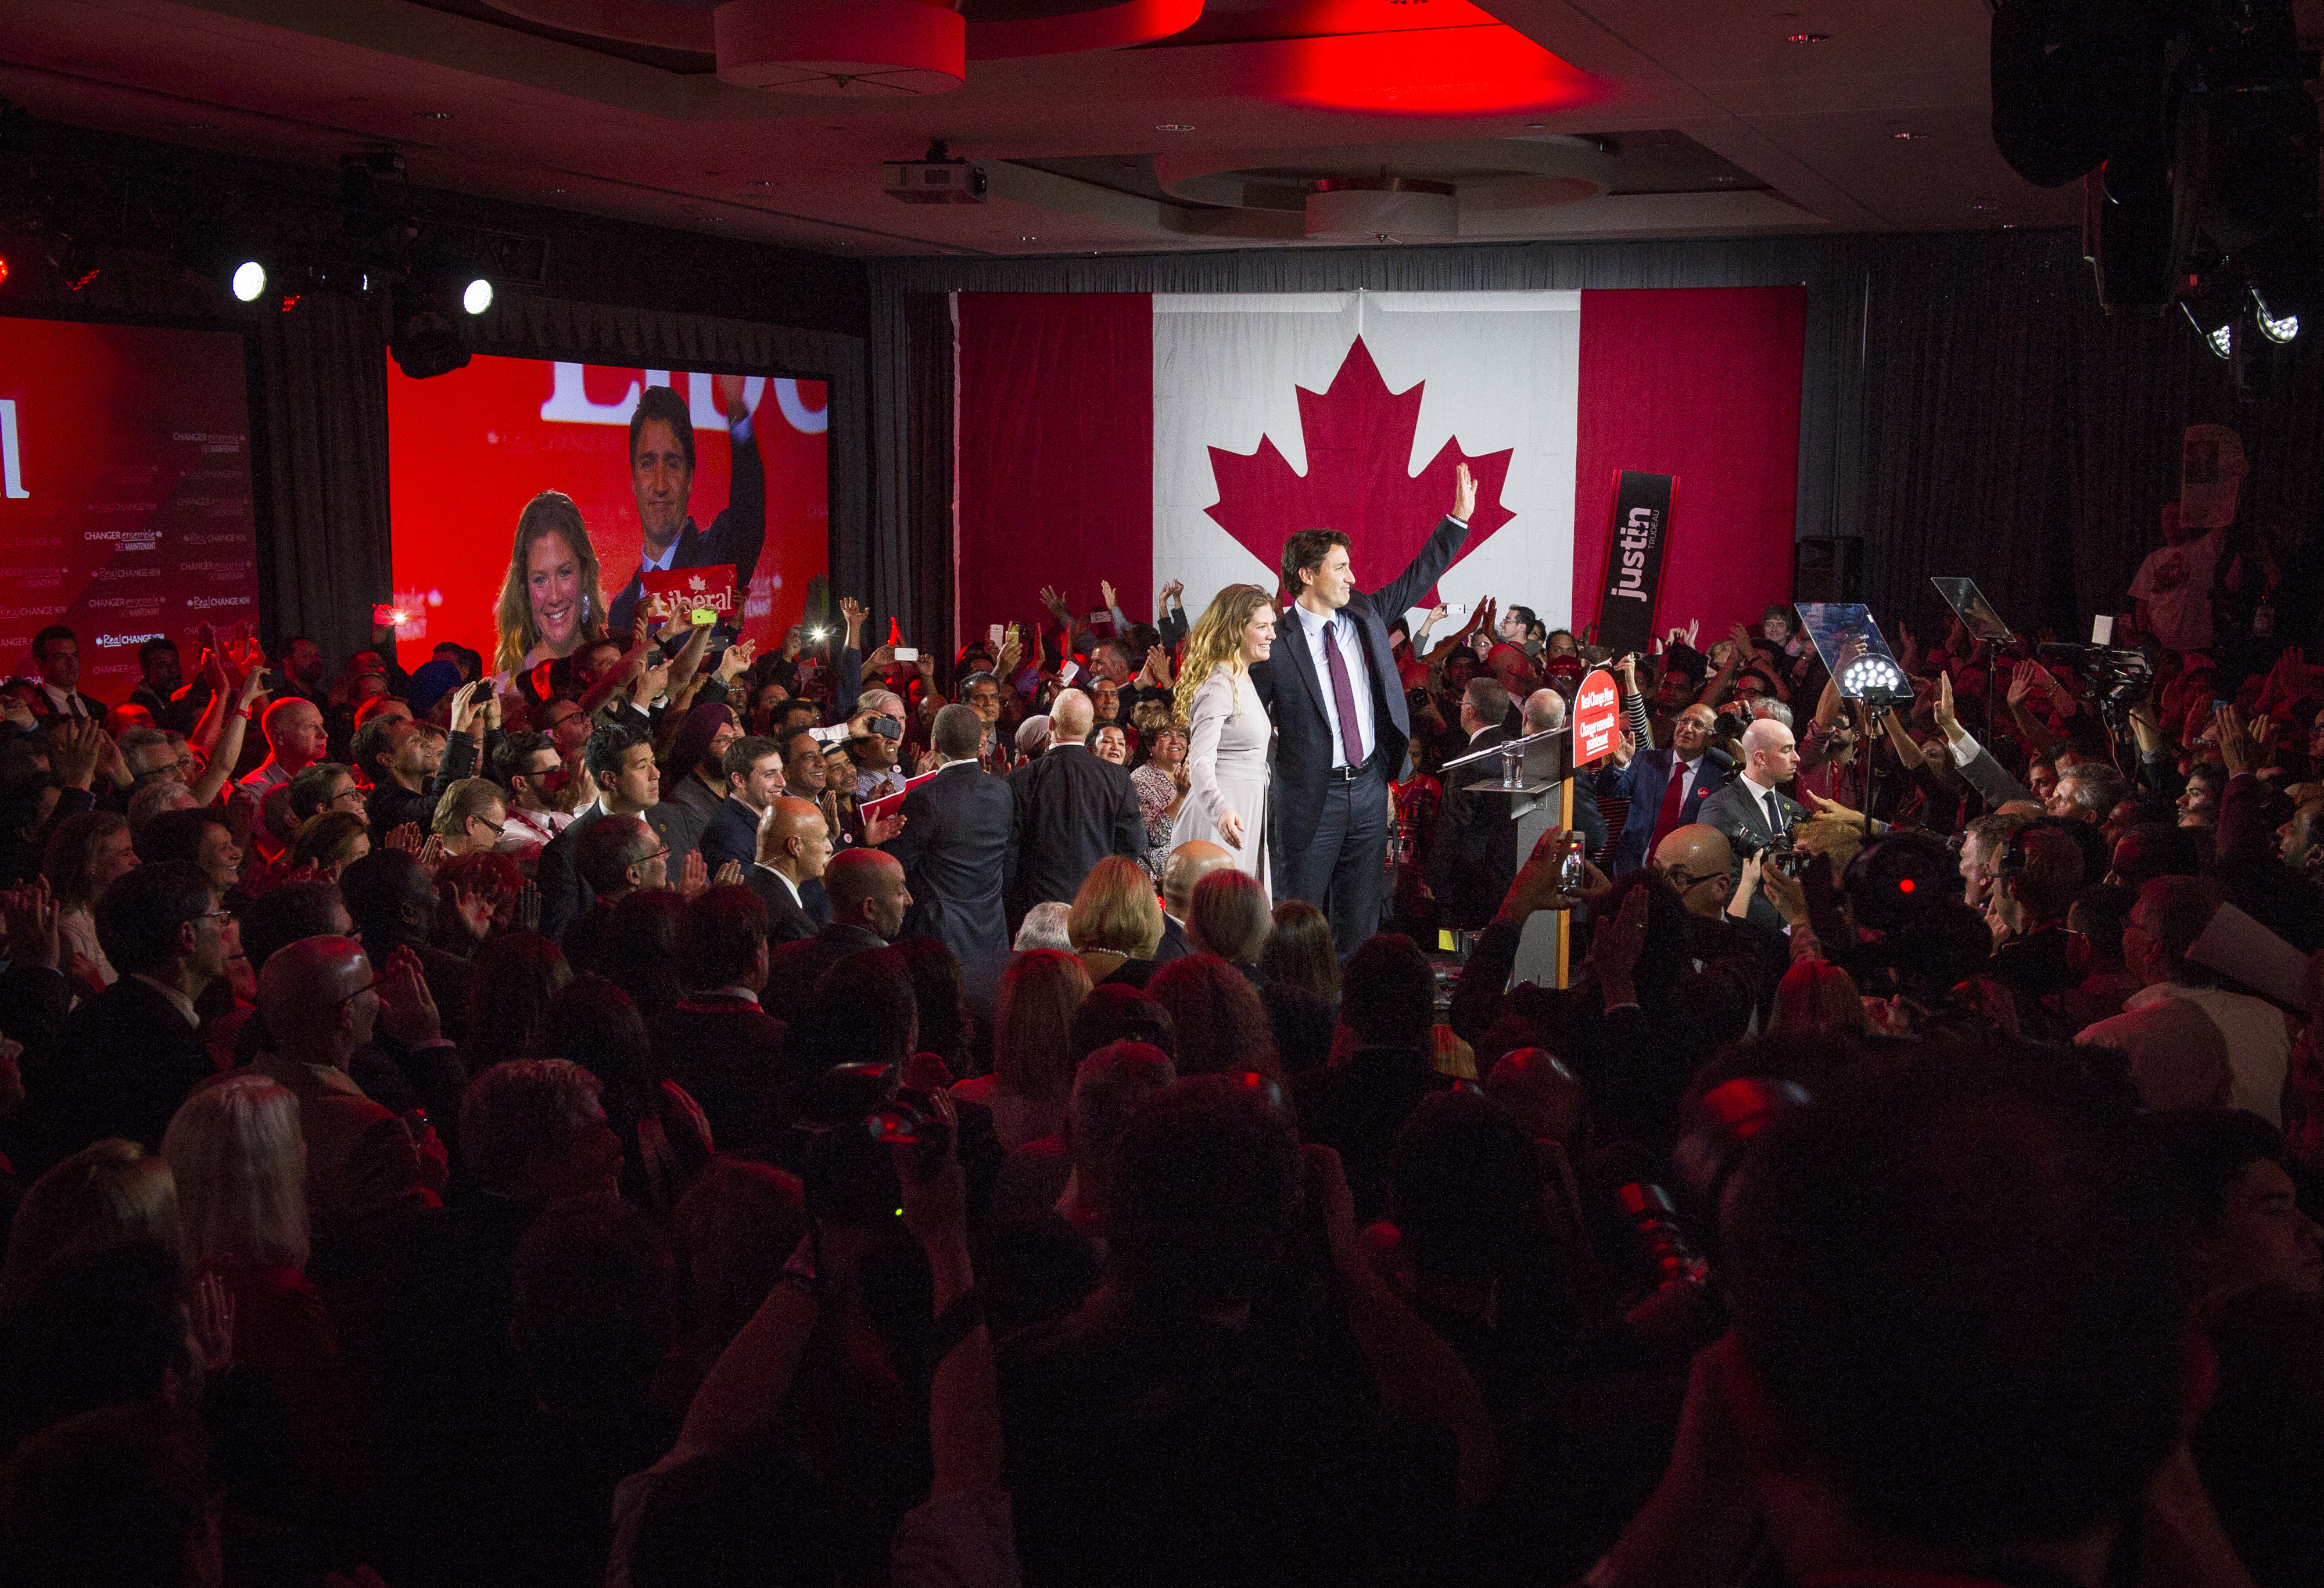 Justin Trudeau, Canada's prime minister-elect and leader of the Liberal Party of Canada, and his wife Sophie Gregoire-Trudeau wave to supporters on election night in Montreal, Quebec, Canada, on Oct. 20, 2015. (Kevin Van Paassen—Bloomberg/Getty Images)